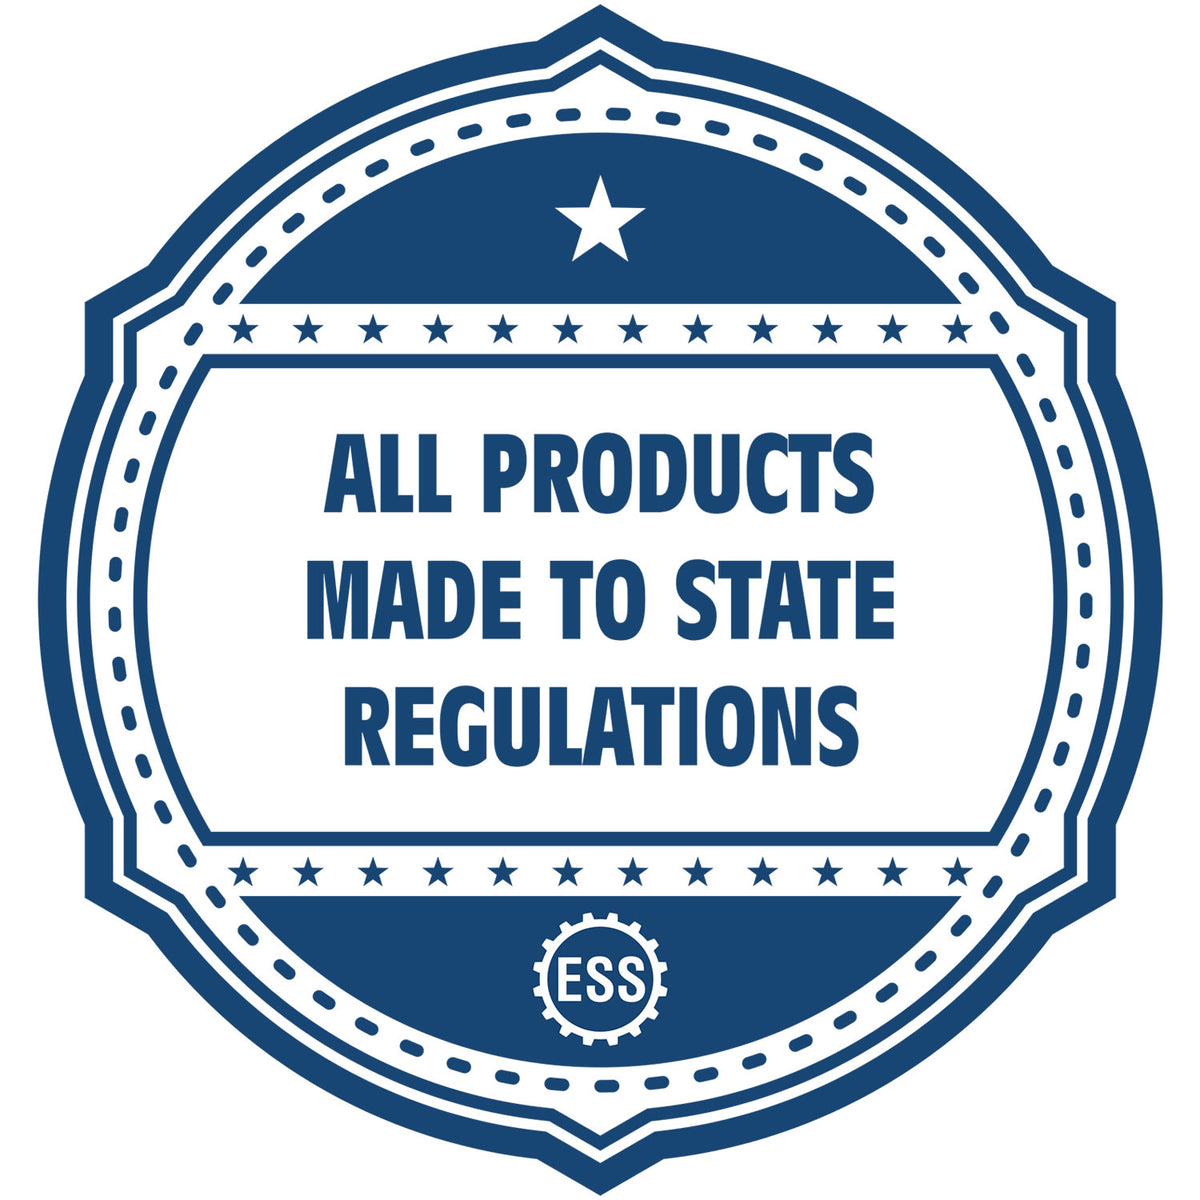 An icon or badge element for the Self-Inking Virginia PE Stamp showing that this product is made in compliance with state regulations.